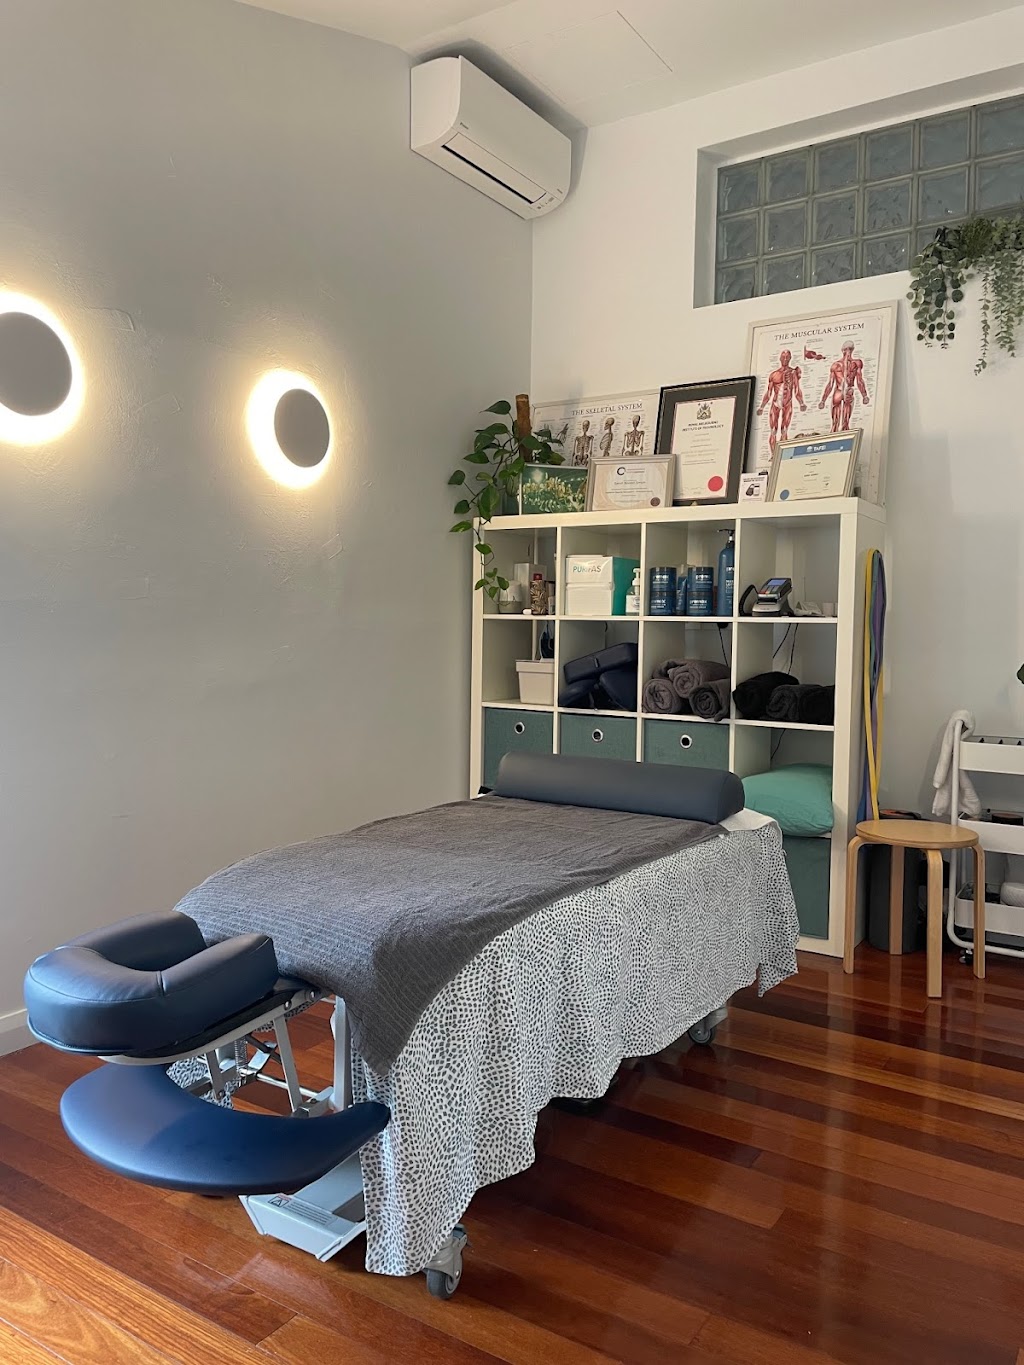 Move Well Remedial Therapies | 114 Taren Rd, Caringbah South NSW 2229, Australia | Phone: 0409 943 226